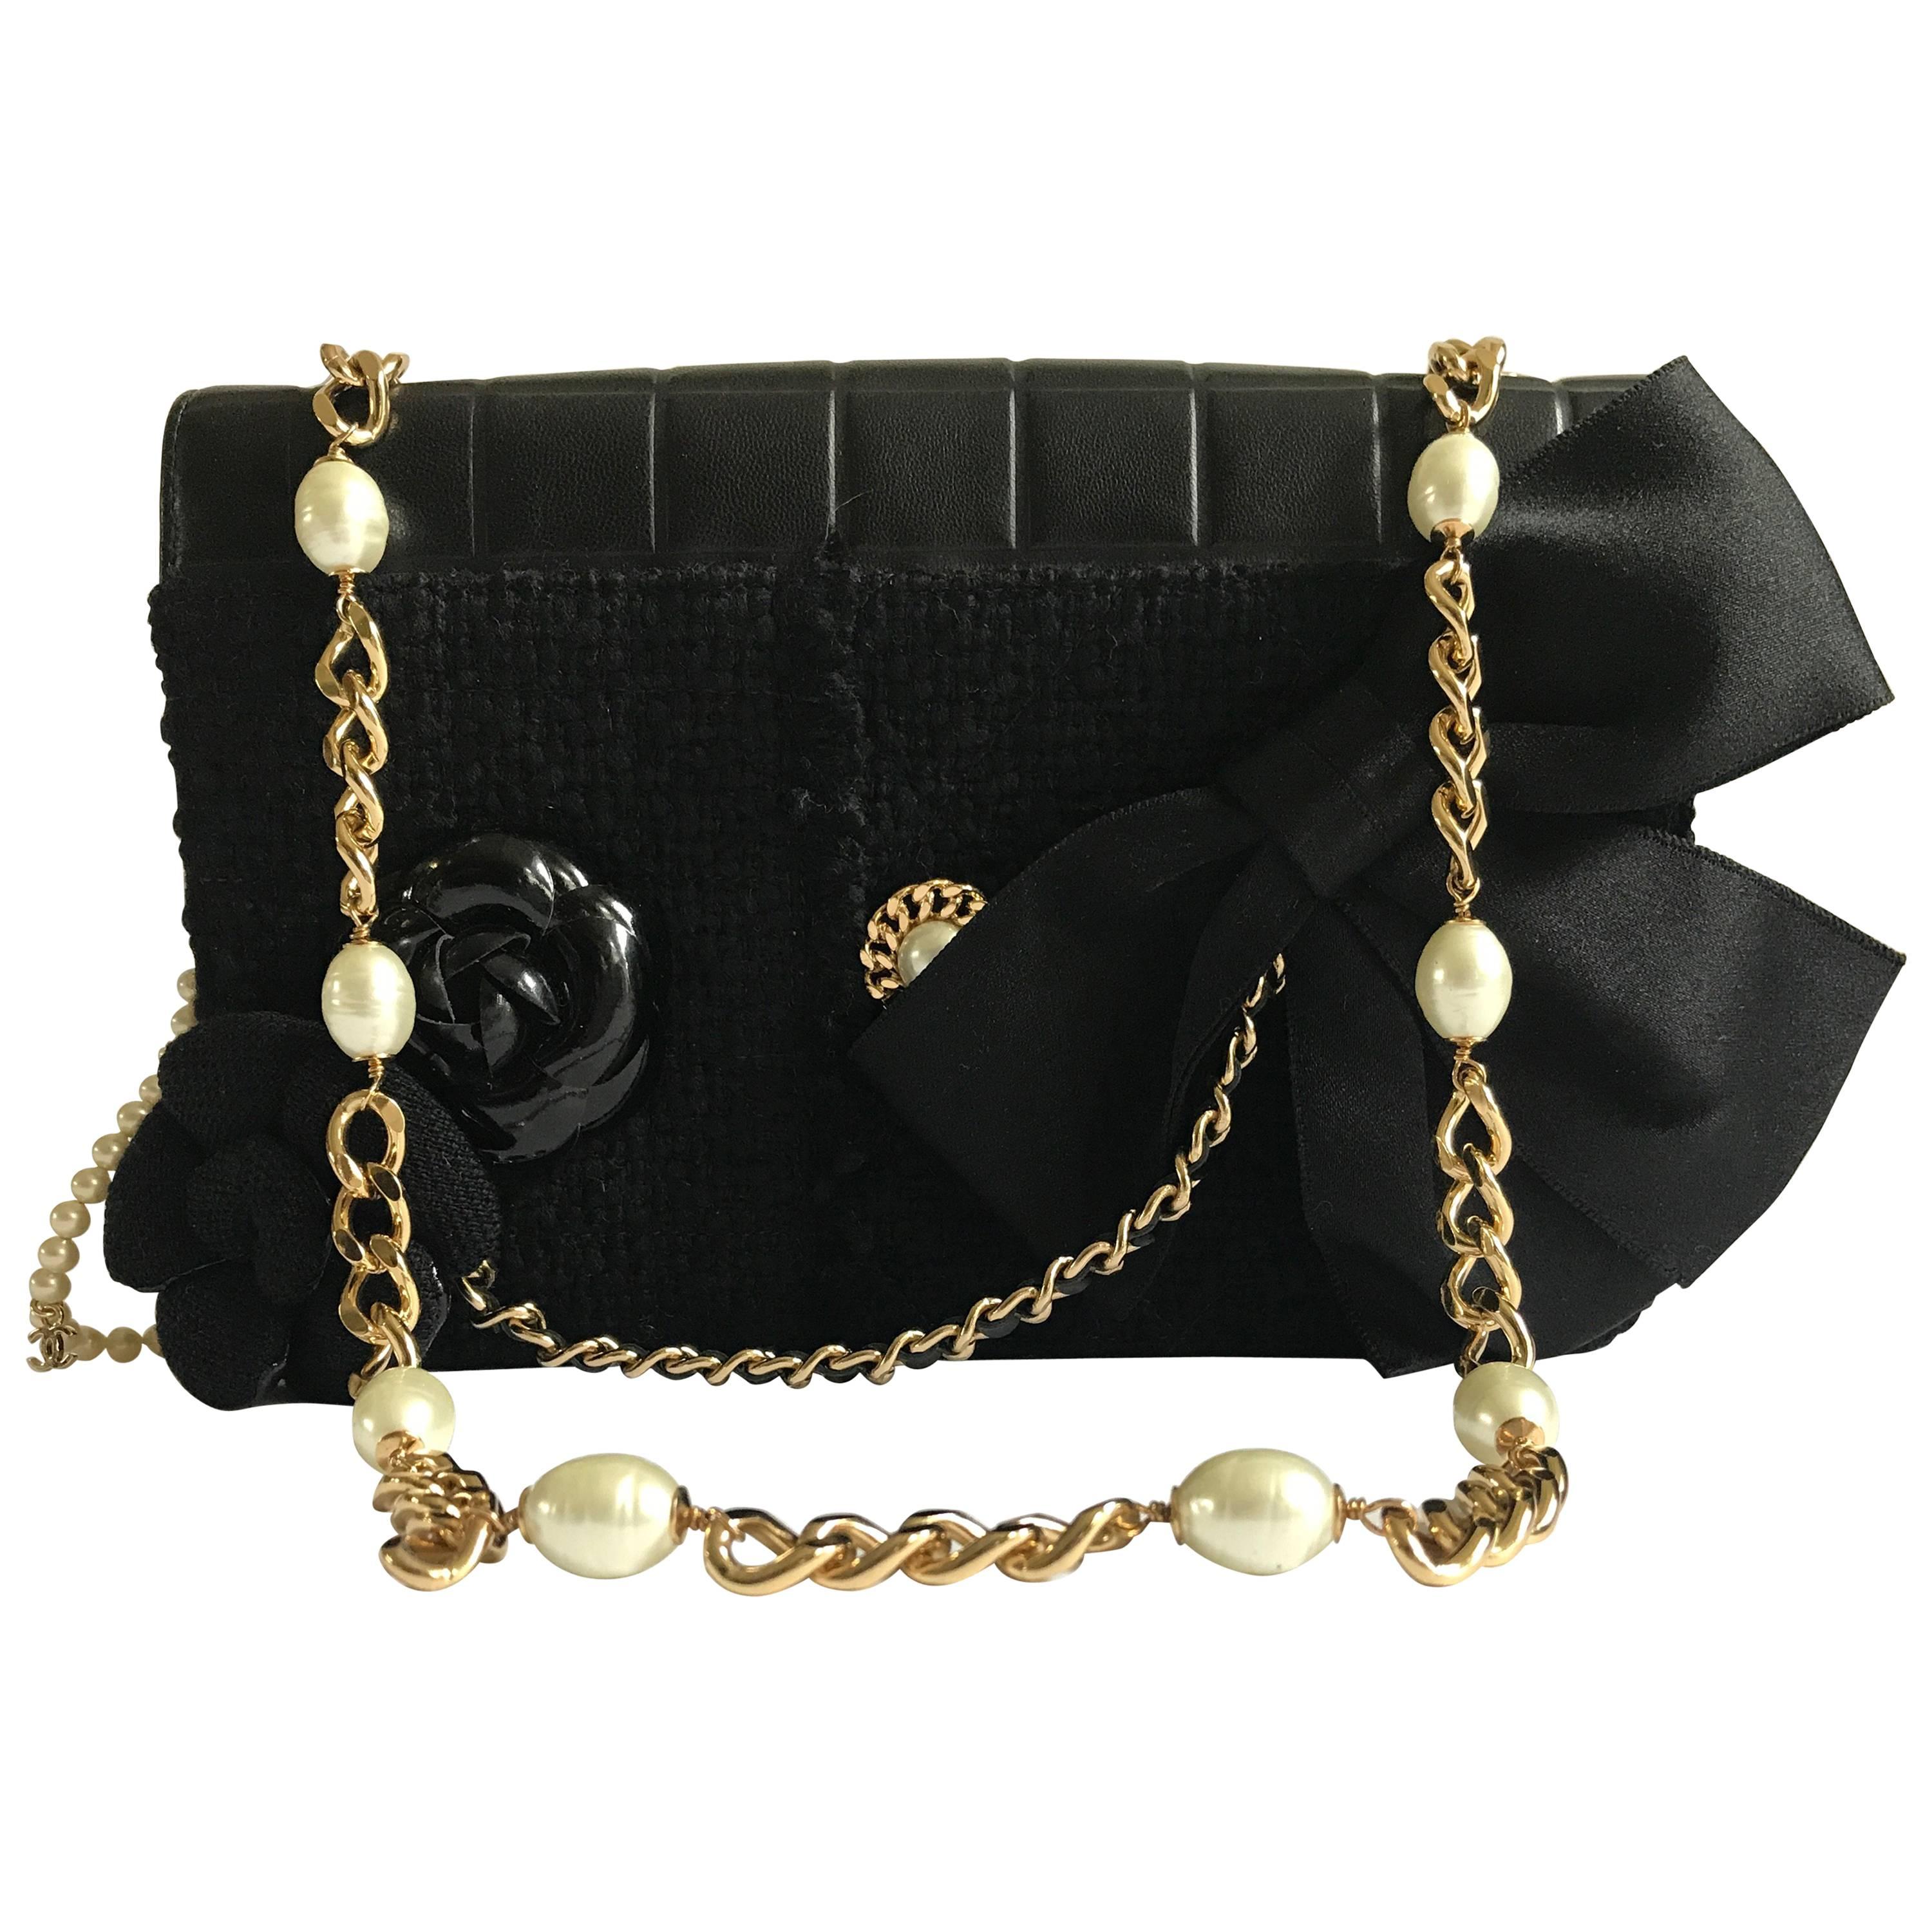 Chanel Black Leather And Tweed Flap Bag With Removable Camellias And Bow